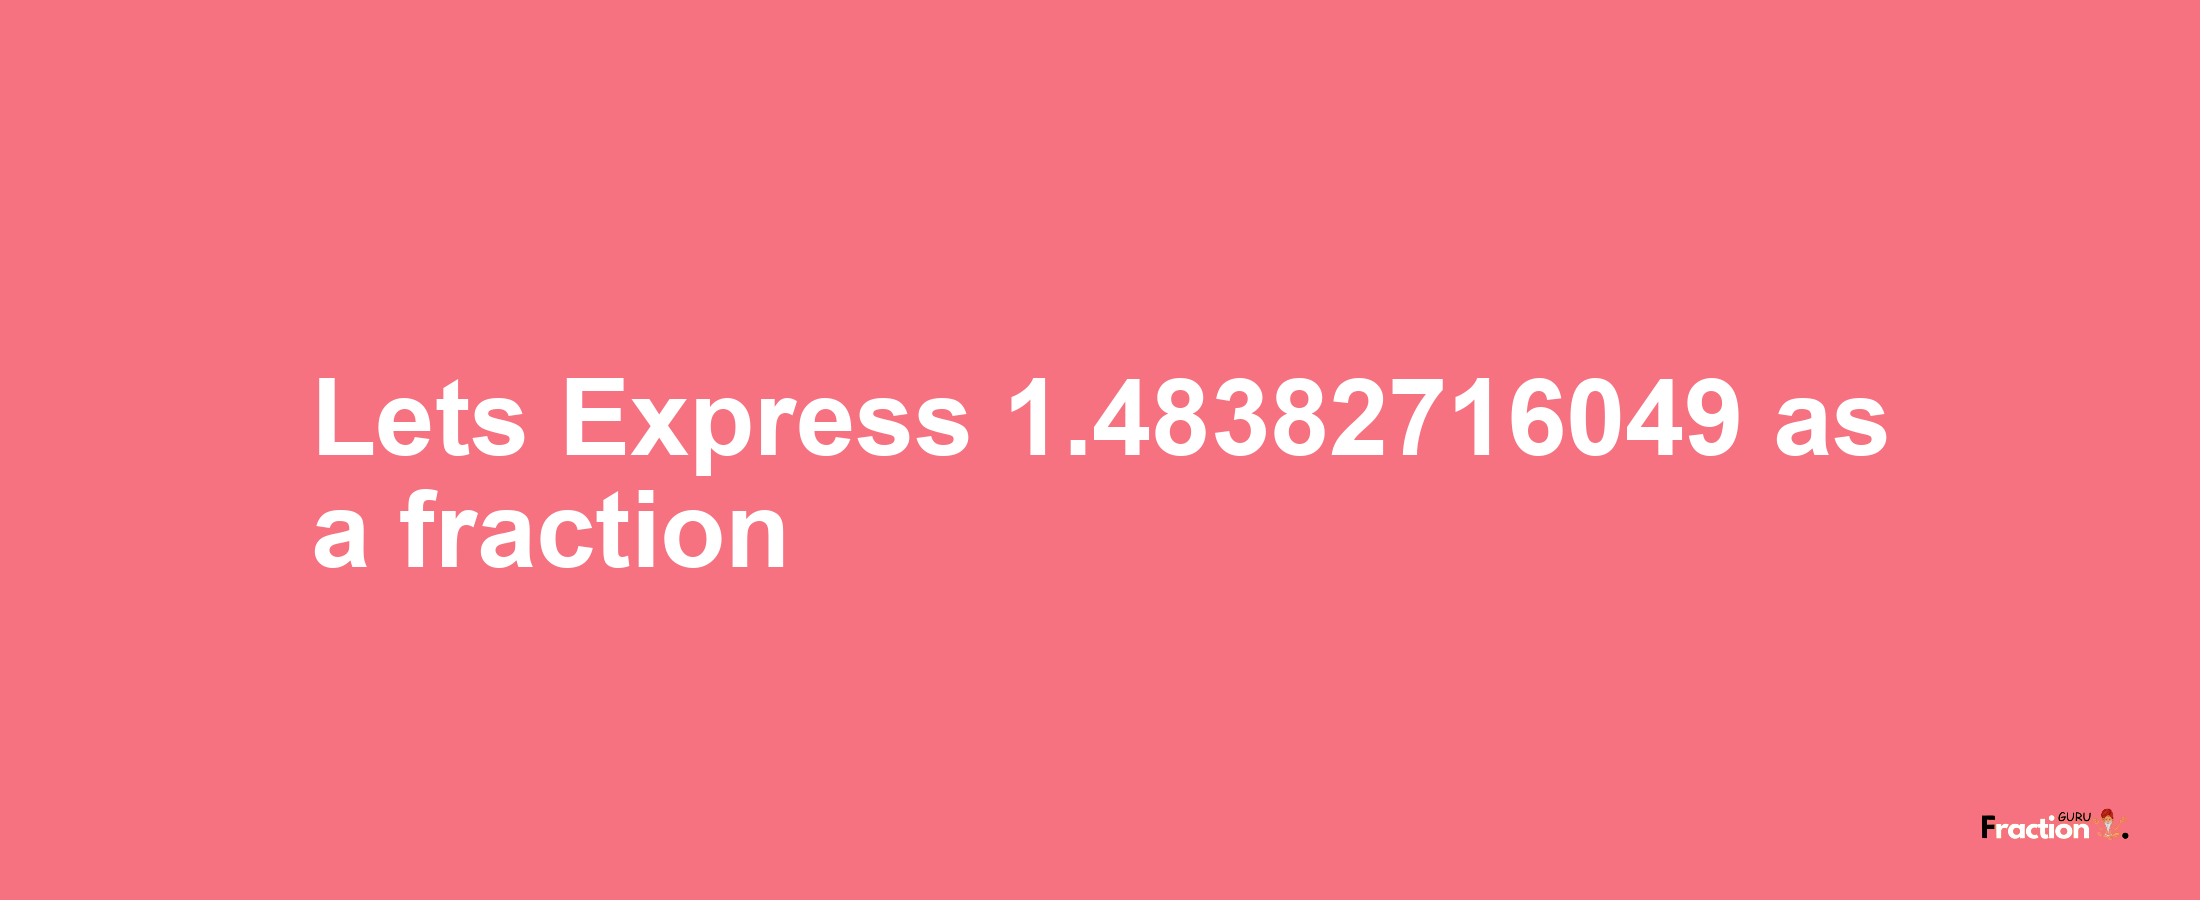 Lets Express 1.48382716049 as afraction